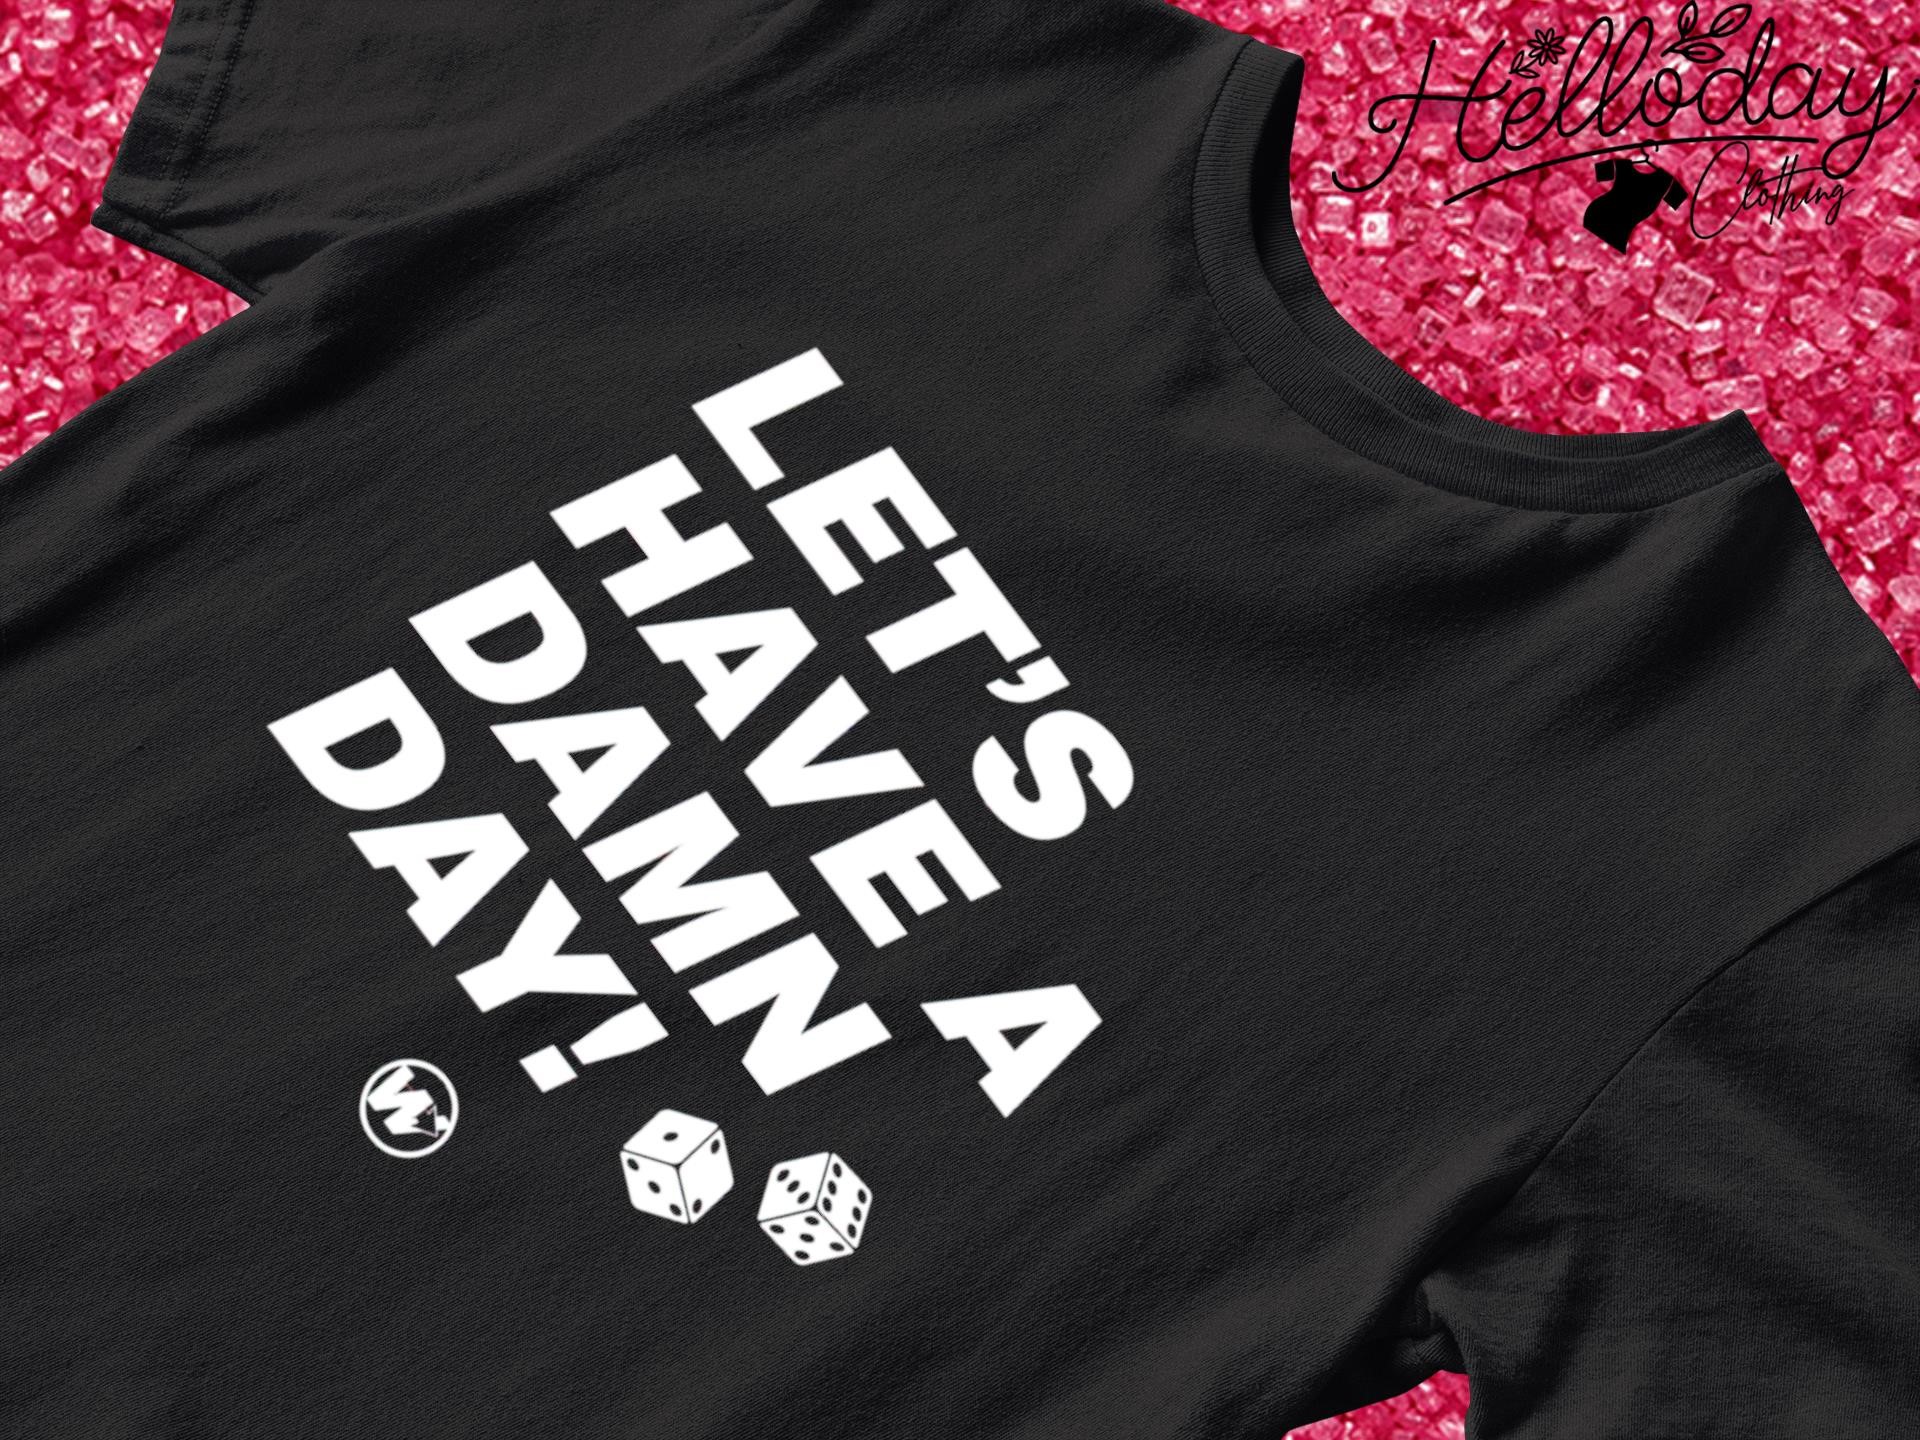 Let's have a damn day shirt